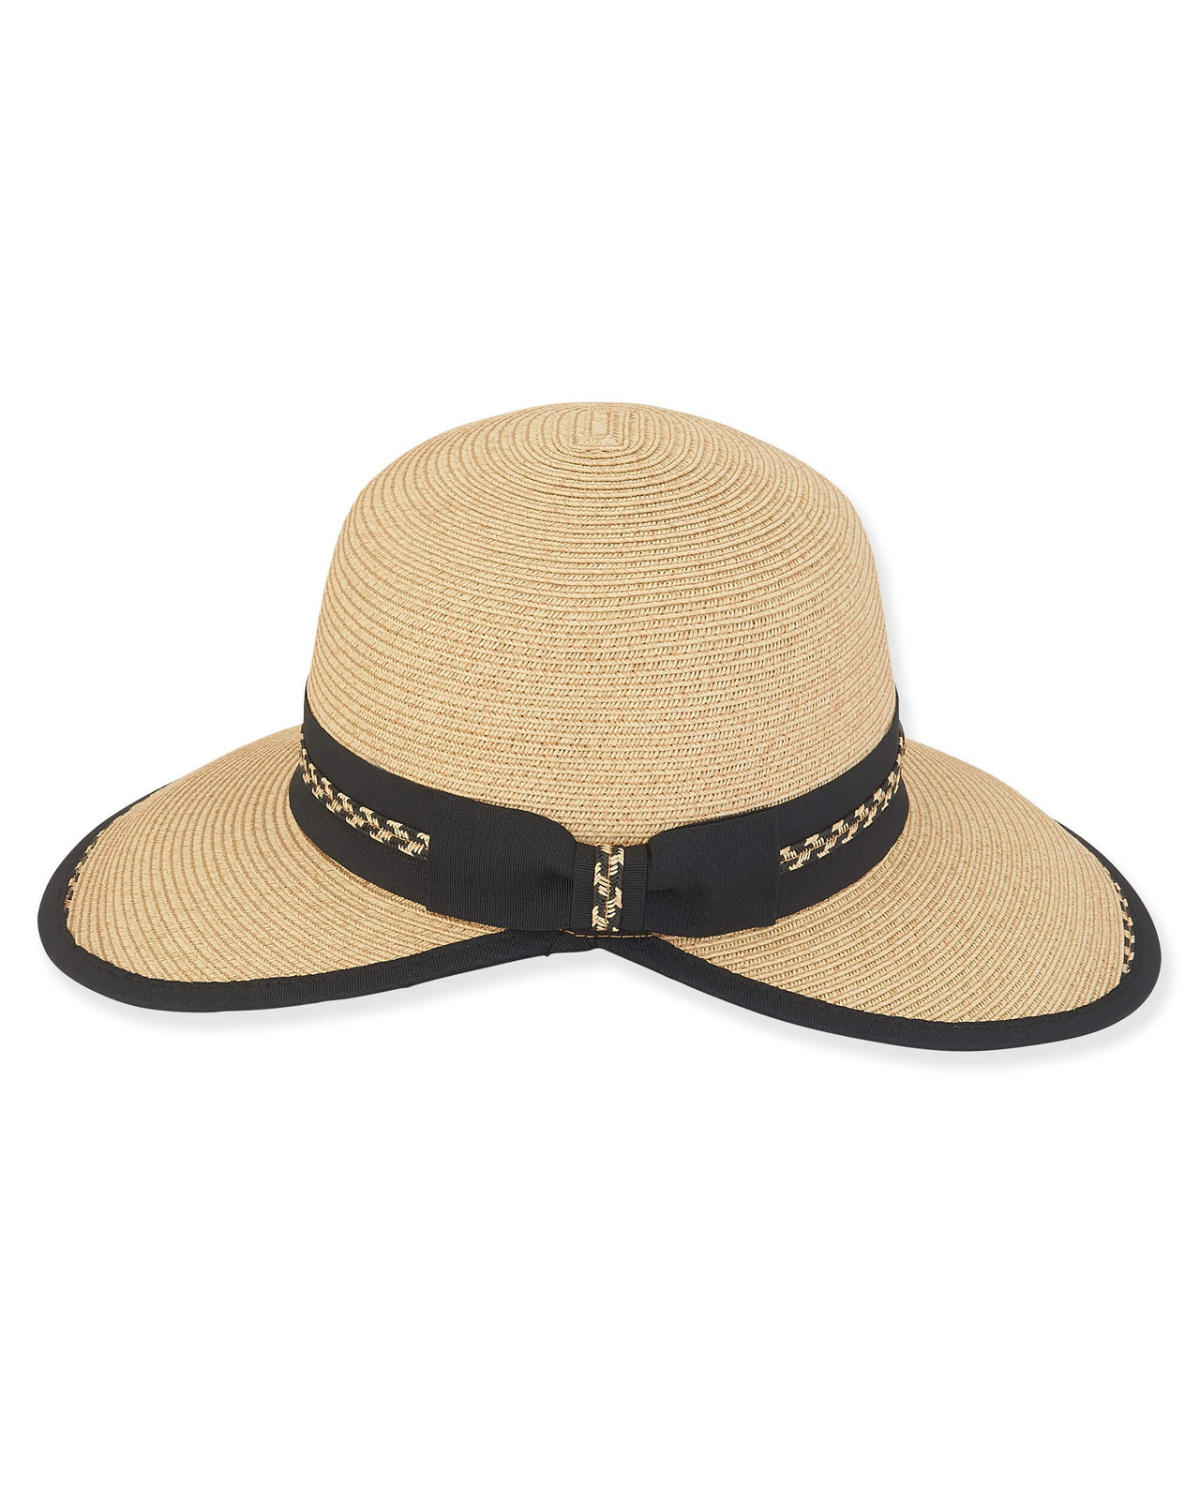 Paper braid backless hat in natural with a black trim